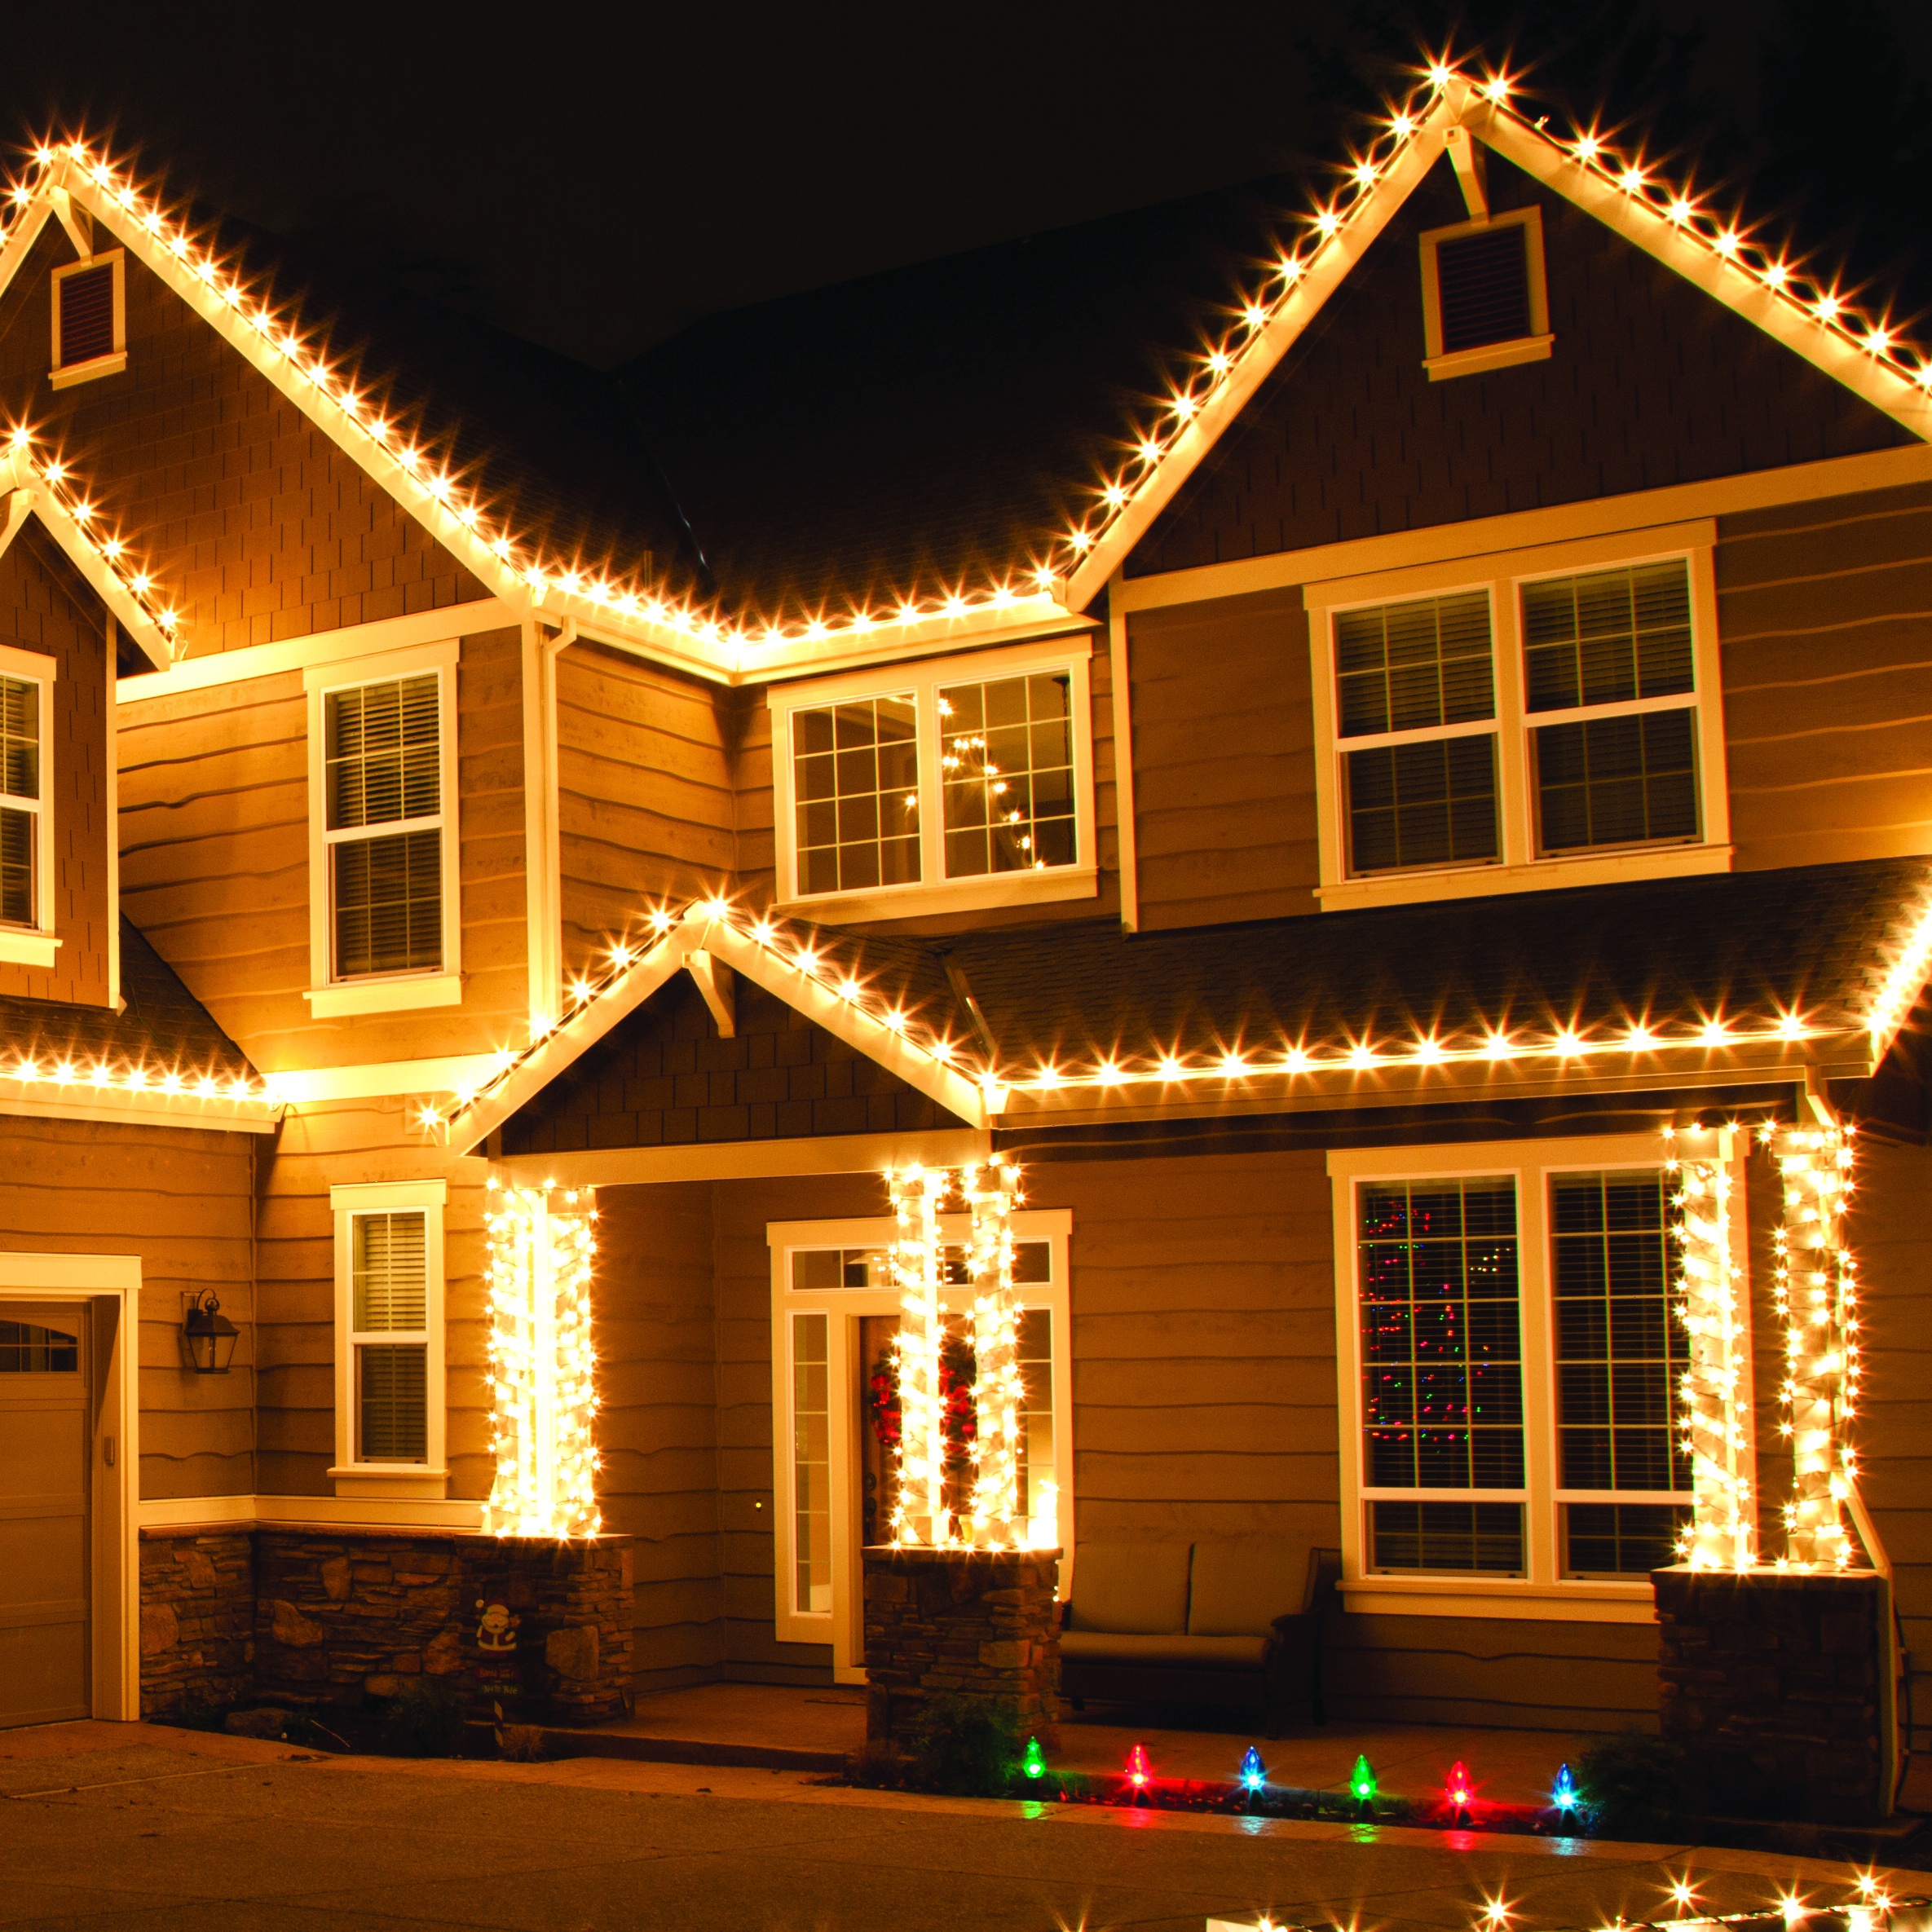 Can someone help me find this exact Christmas light style? r